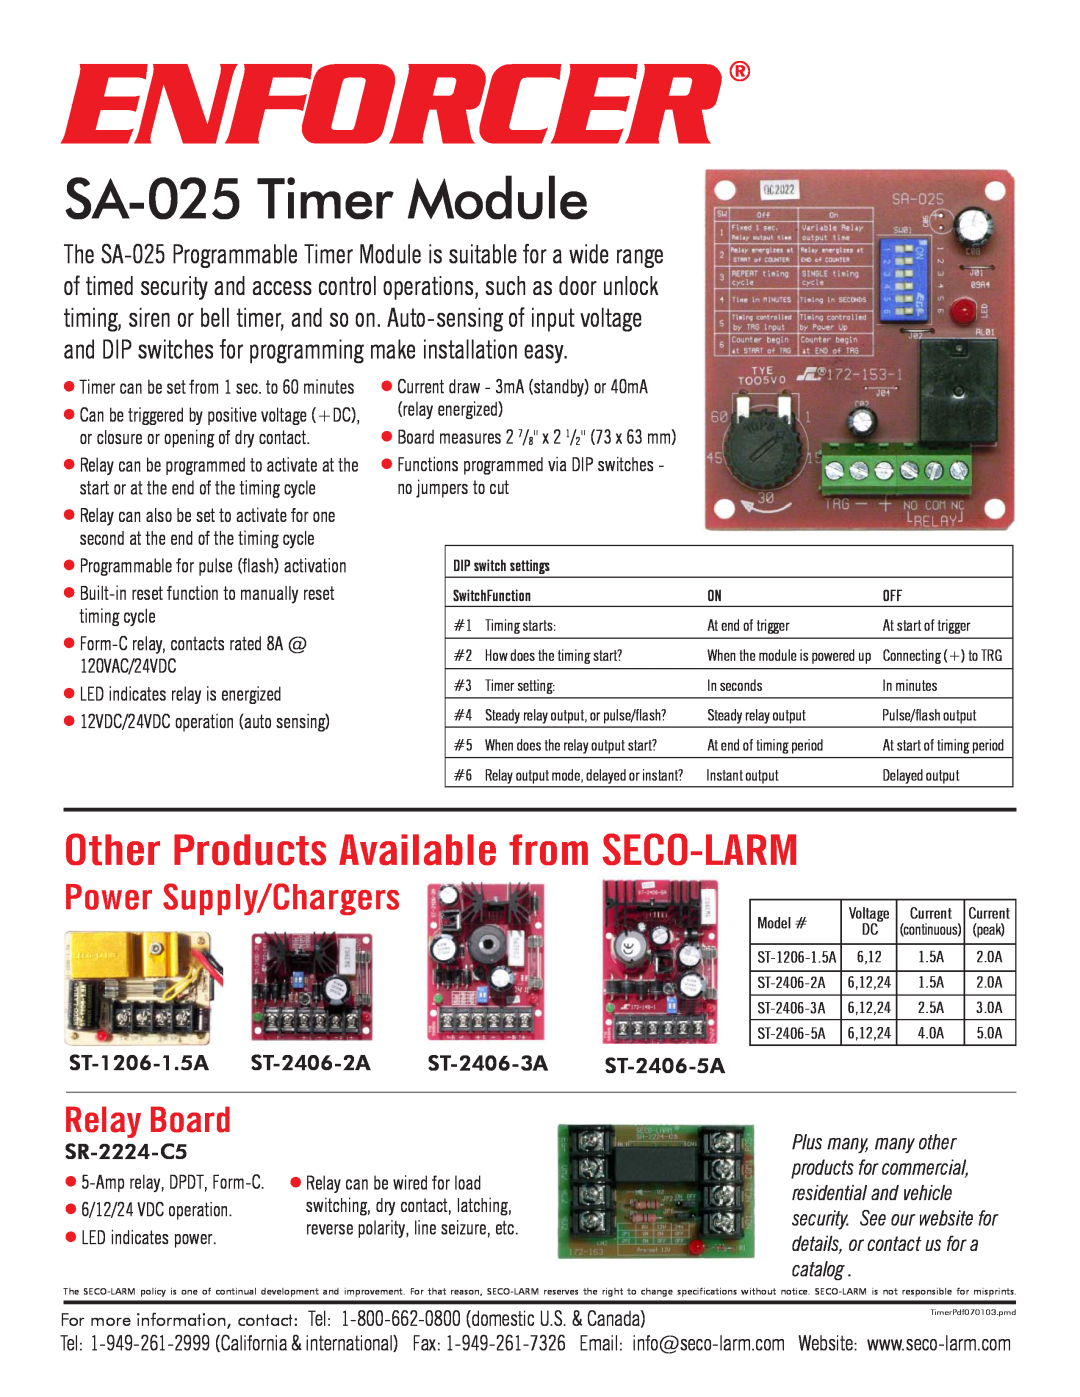 SECO-LARM USA specifications Enforcer, SA-025Timer Module, Other Products Available from SECO-LARM, Relay Board 